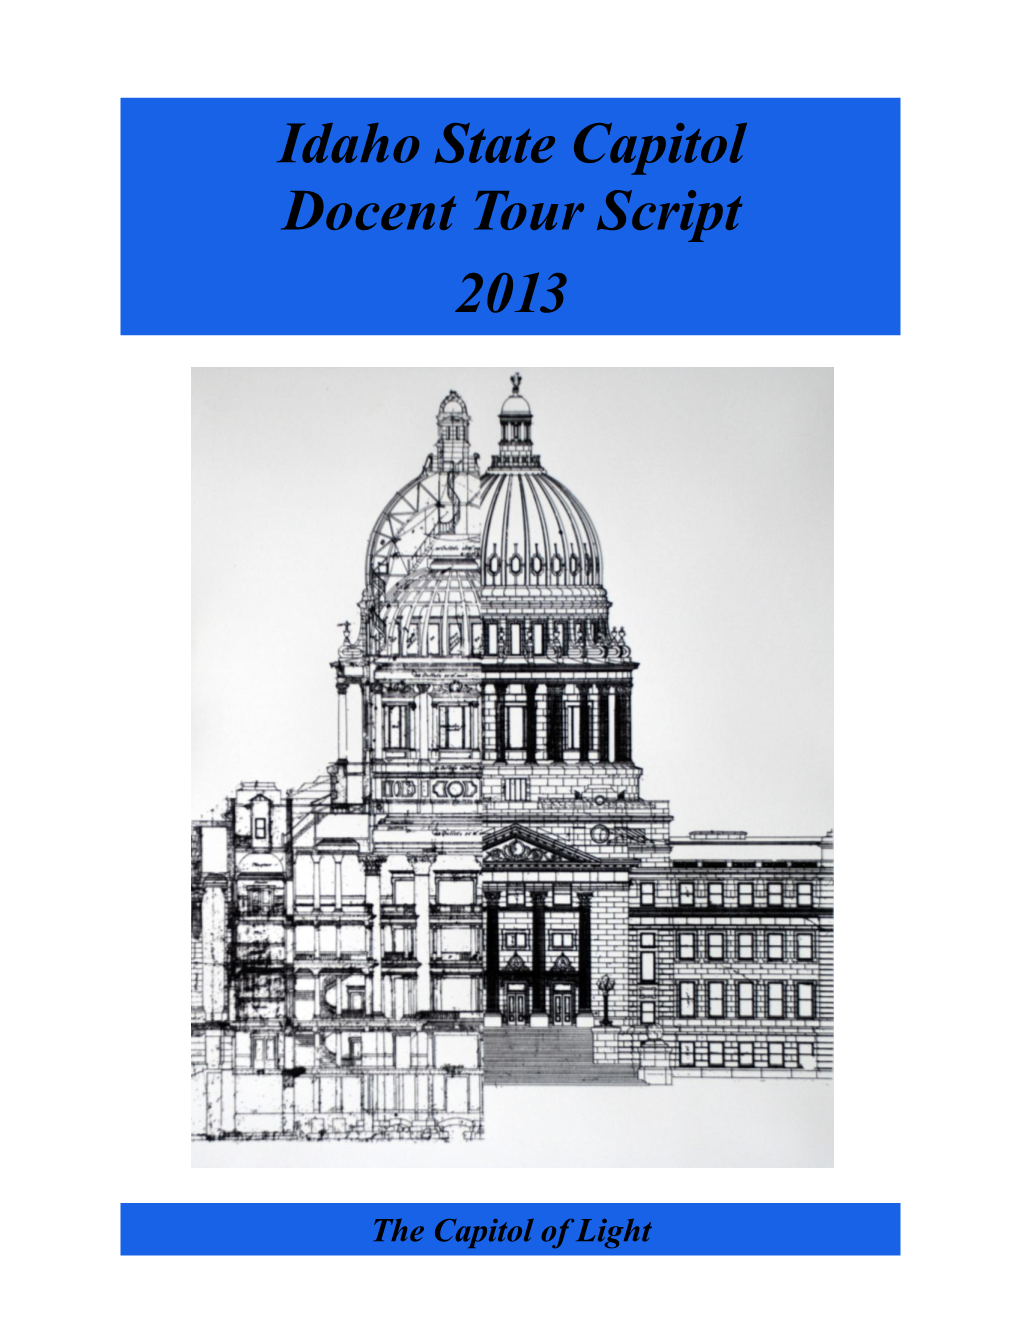 Idaho State Capitol Docent Tour Script 2013